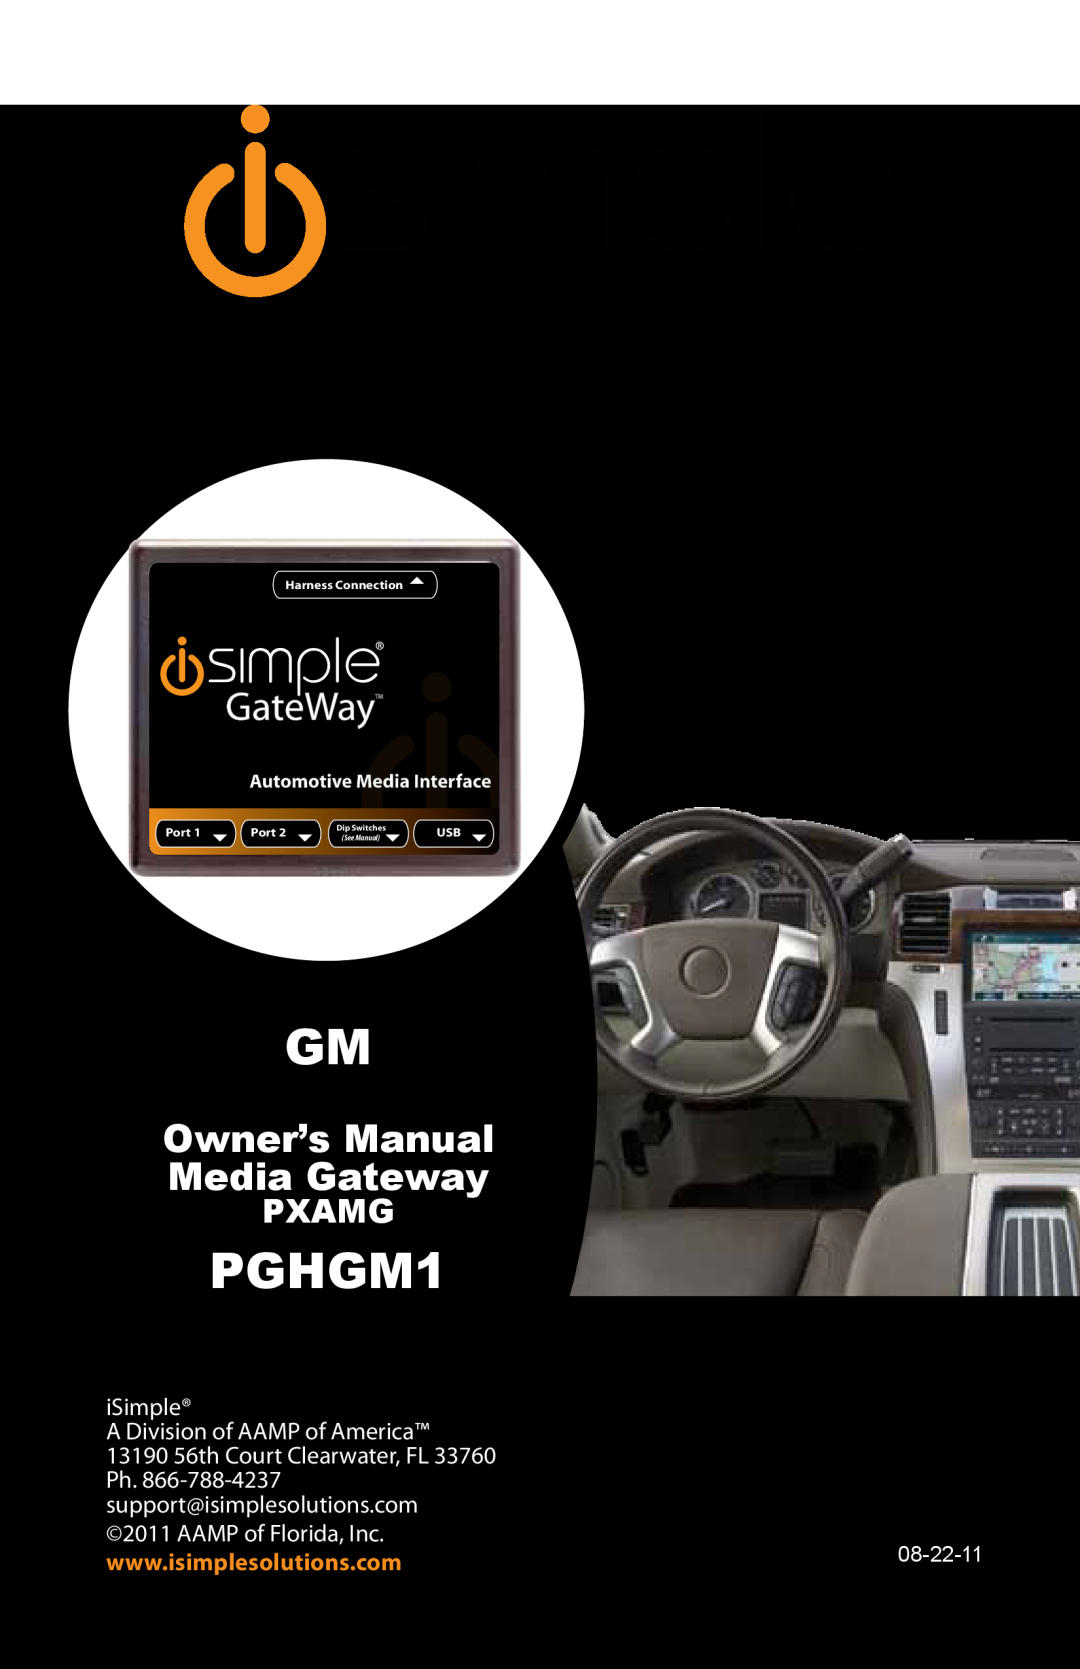 iSimple PXAMG owner manual iPod, Expand Your Factory Radio, PGHGM1, Owner’s Manual Media Gateway, Pxamg, 08-22-11, Usb  